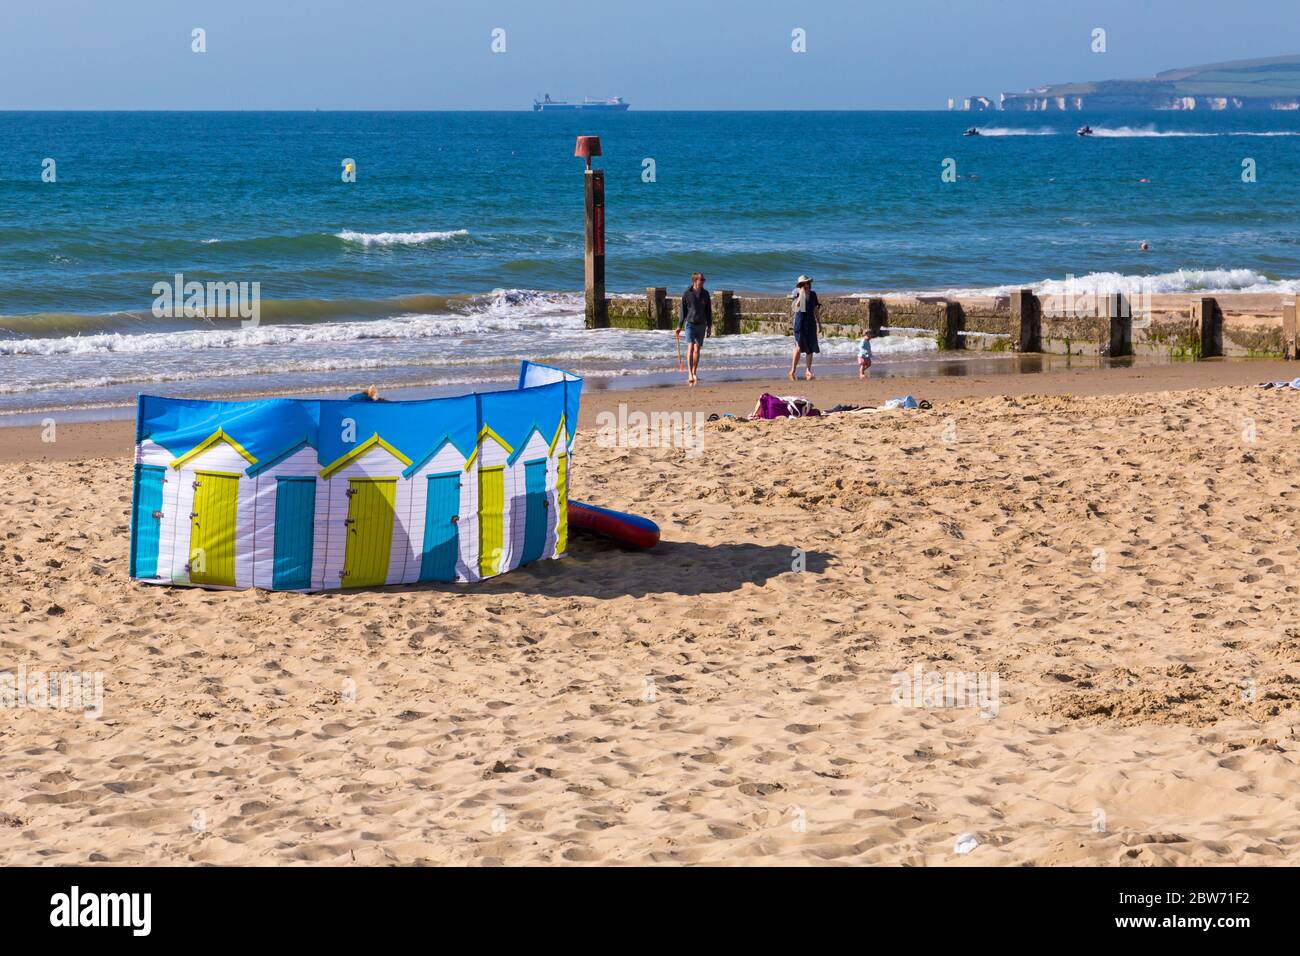 Bournemouth, Dorset UK. 30th May 2020. UK weather: hot sunny day at Bournemouth beaches as the glorious weather continues and temperatures rise with clear blue skies and unbroken sunshine. Sunseekers head to the seaside early to get a good spot and enjoy the sunshine, as the beaches are expected to get packed later. Credit: Carolyn Jenkins/Alamy Live News Stock Photo